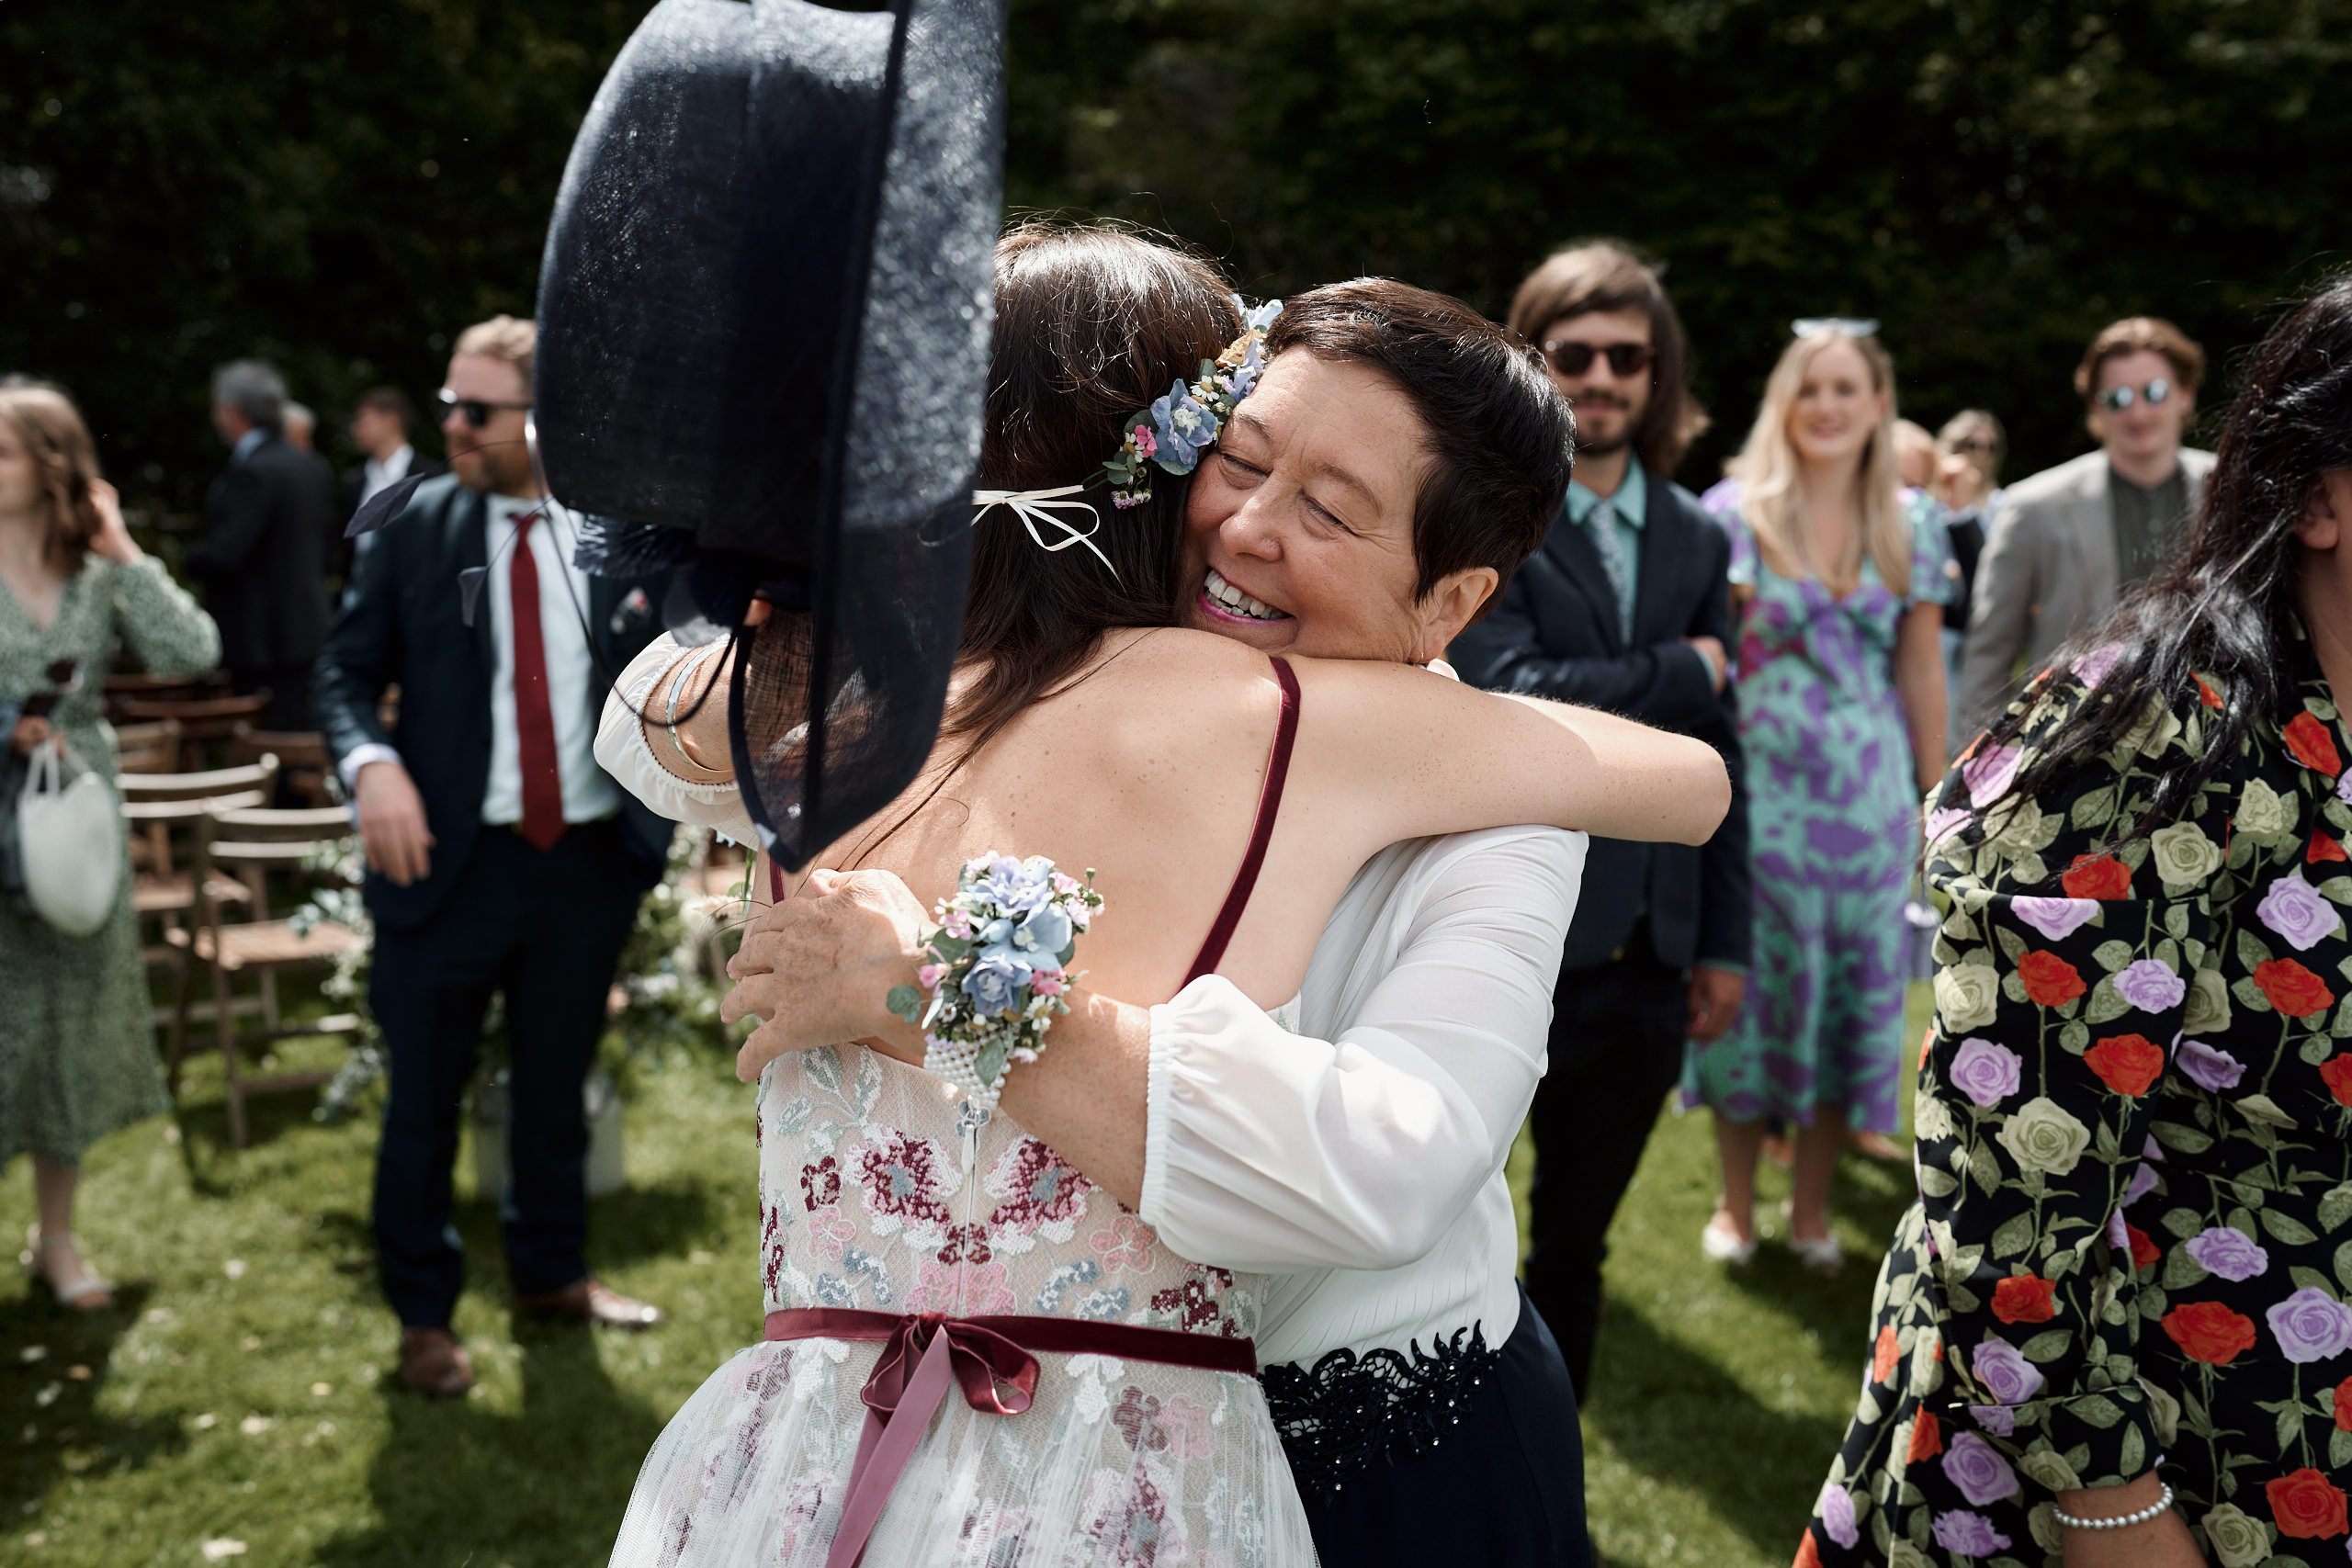 A lady is giving another lady a hug at a wedding.